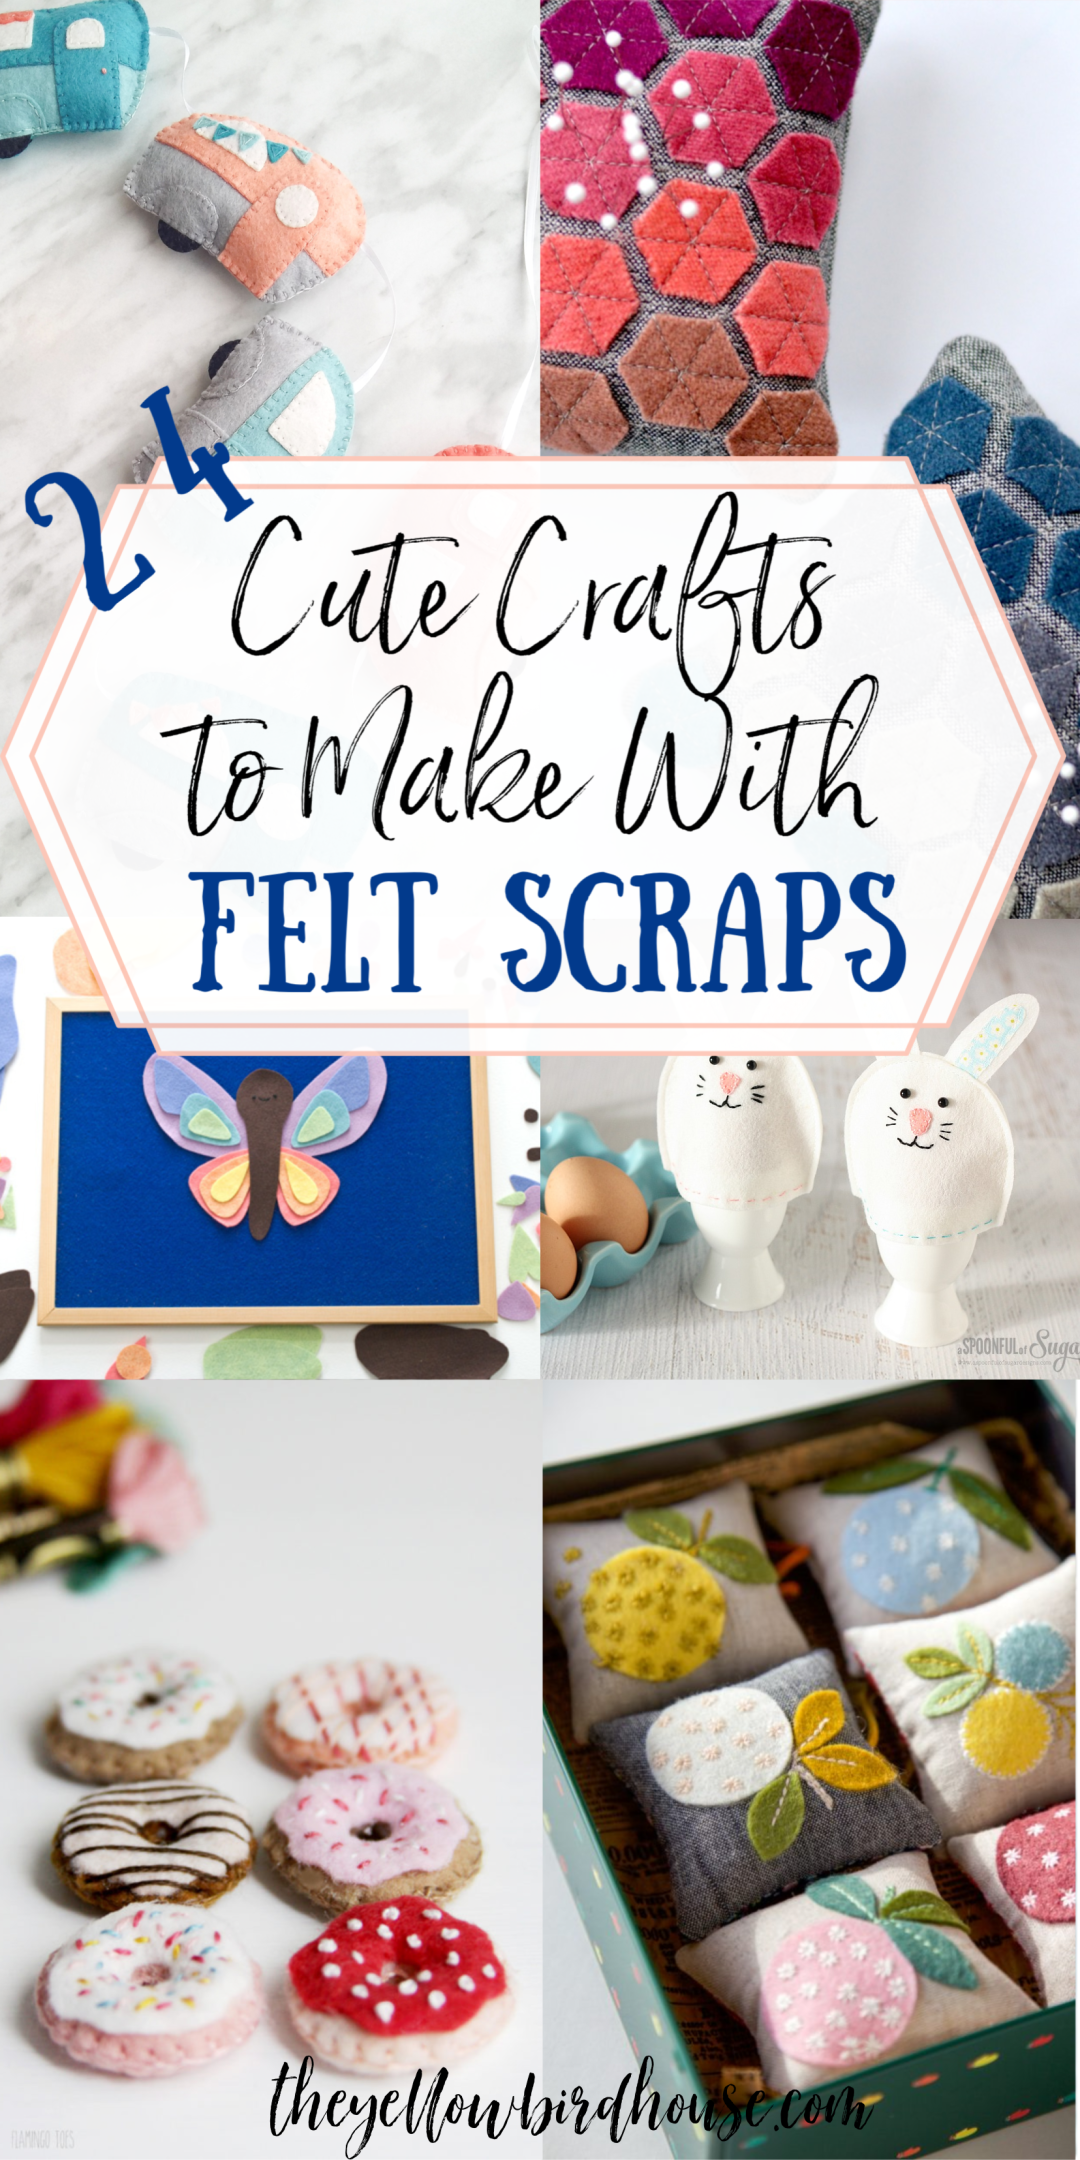 24+ Cute Crafts to Make with Felt Scraps | The Yellow Birdhouse - 24+ Cute Crafts to Make with Felt Scraps | The Yellow Birdhouse -   fabric crafts for kids to make